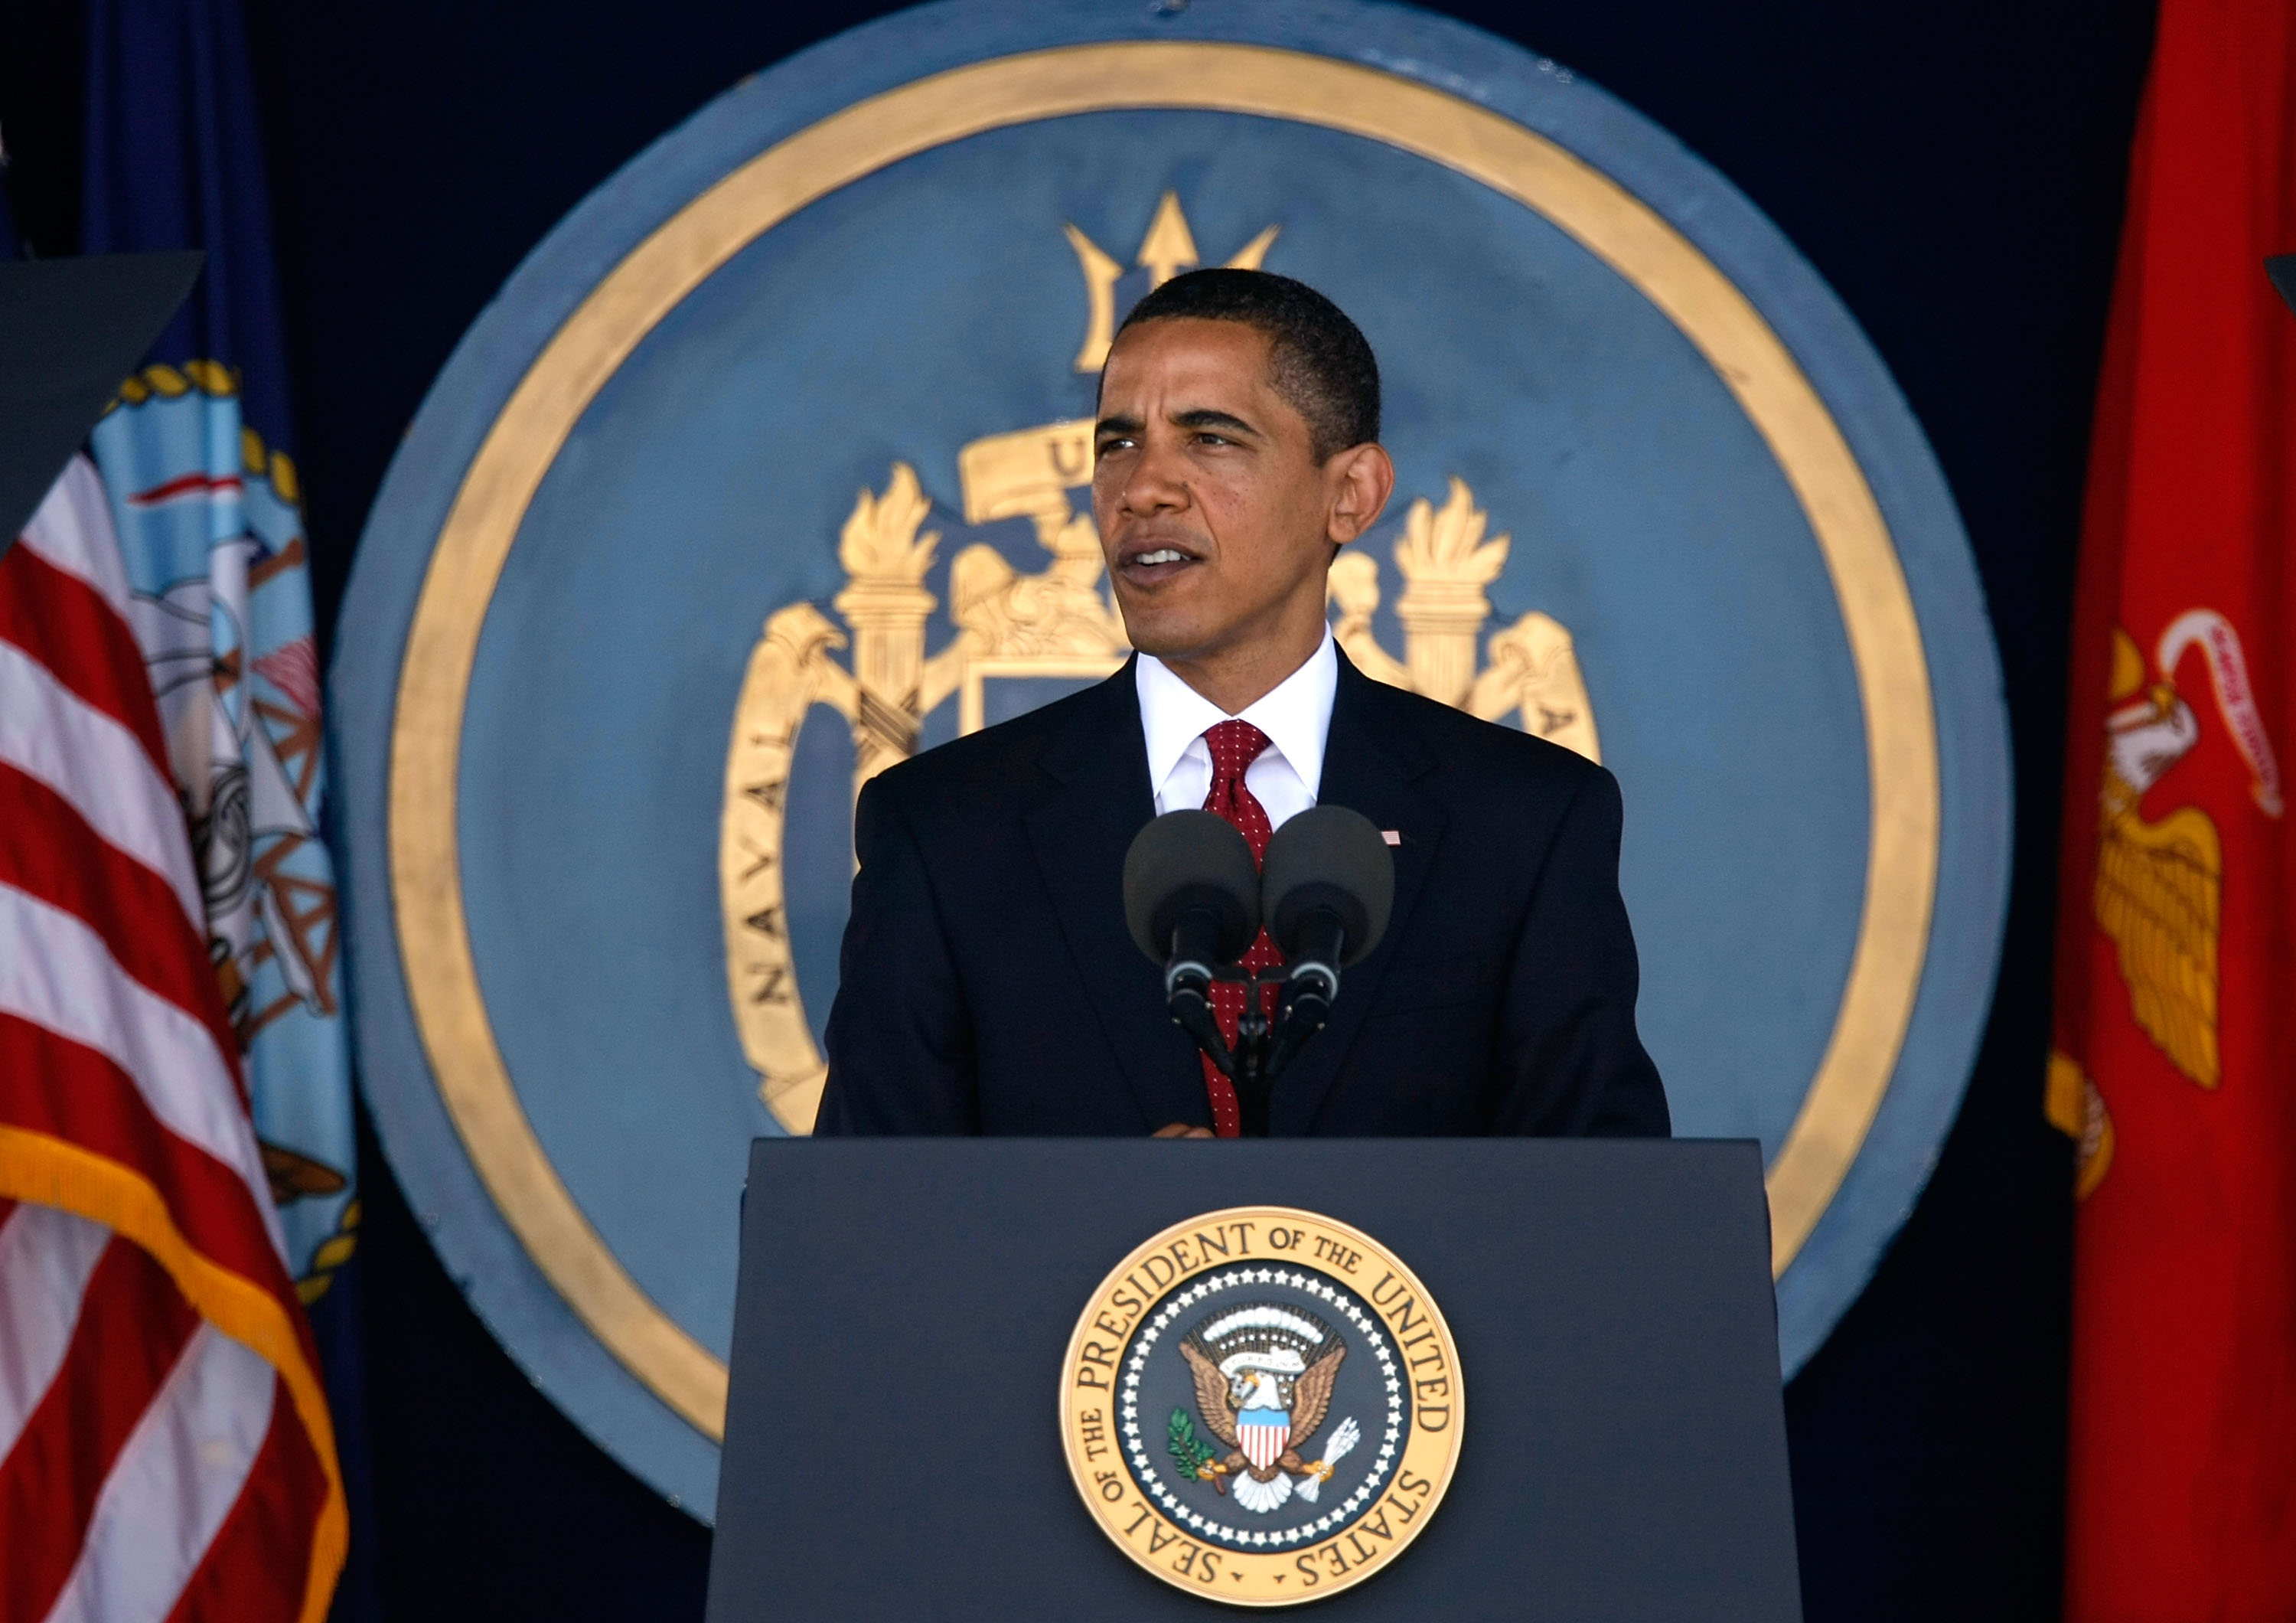 Obama Delivers Commencement Address At U.S. Naval Academy